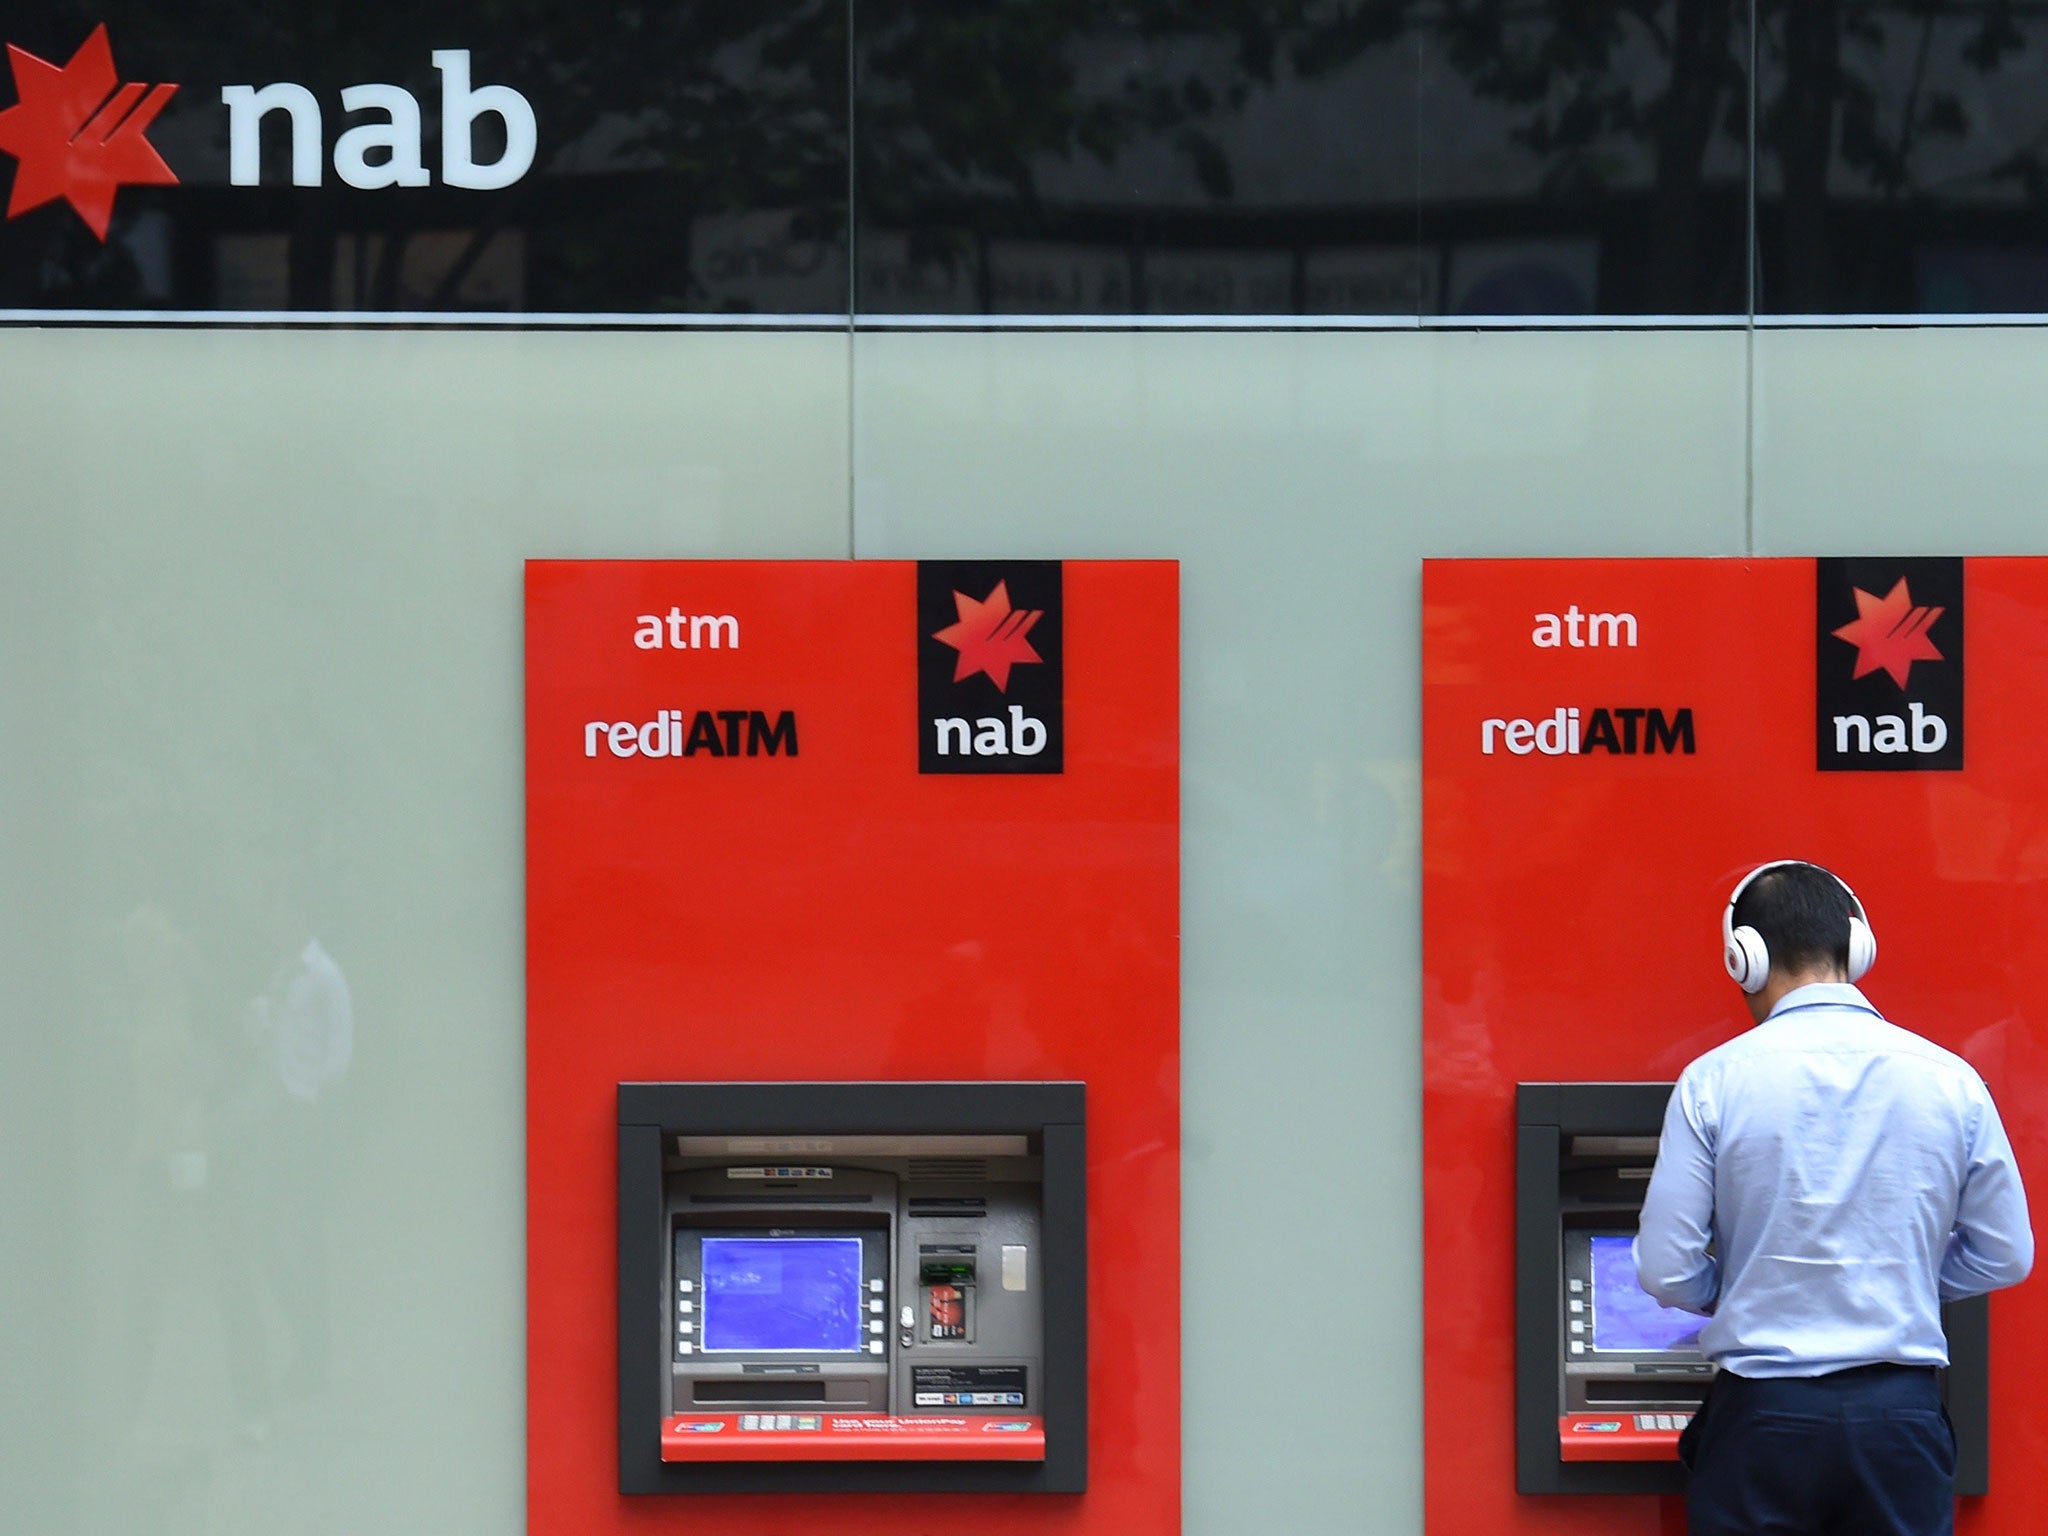 National Australia Bank had to stump up £1.6bn to cover future liabilities in the PPI mis-selling scandal